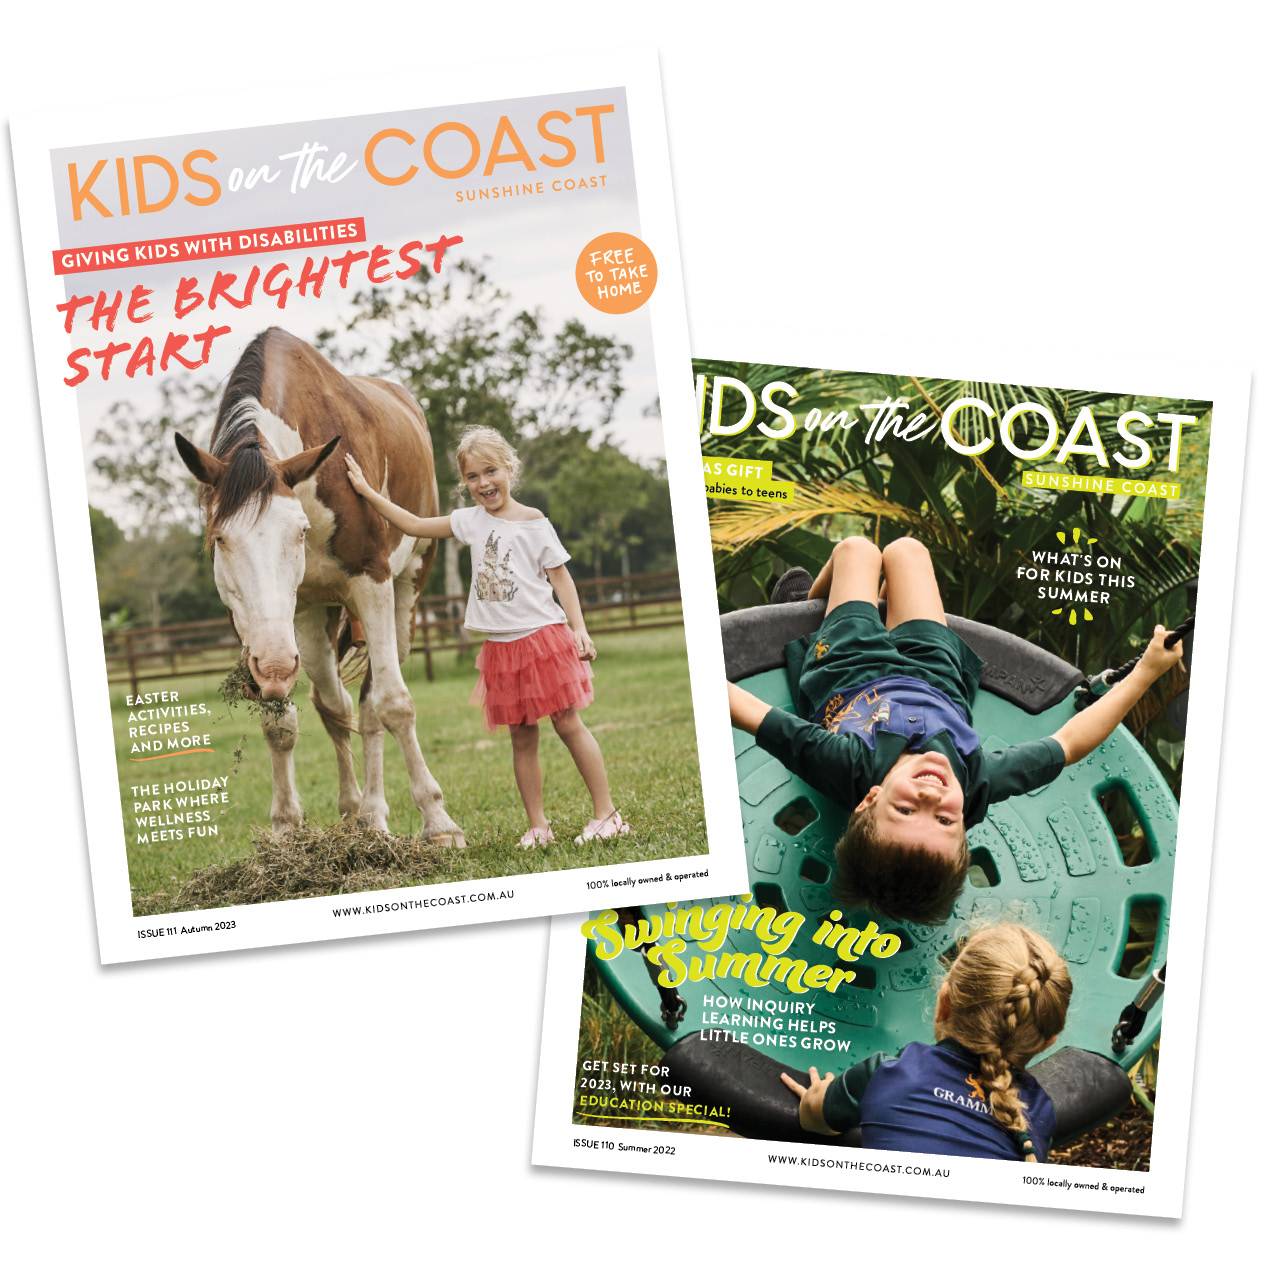 Kids on the Coast magazine front covers